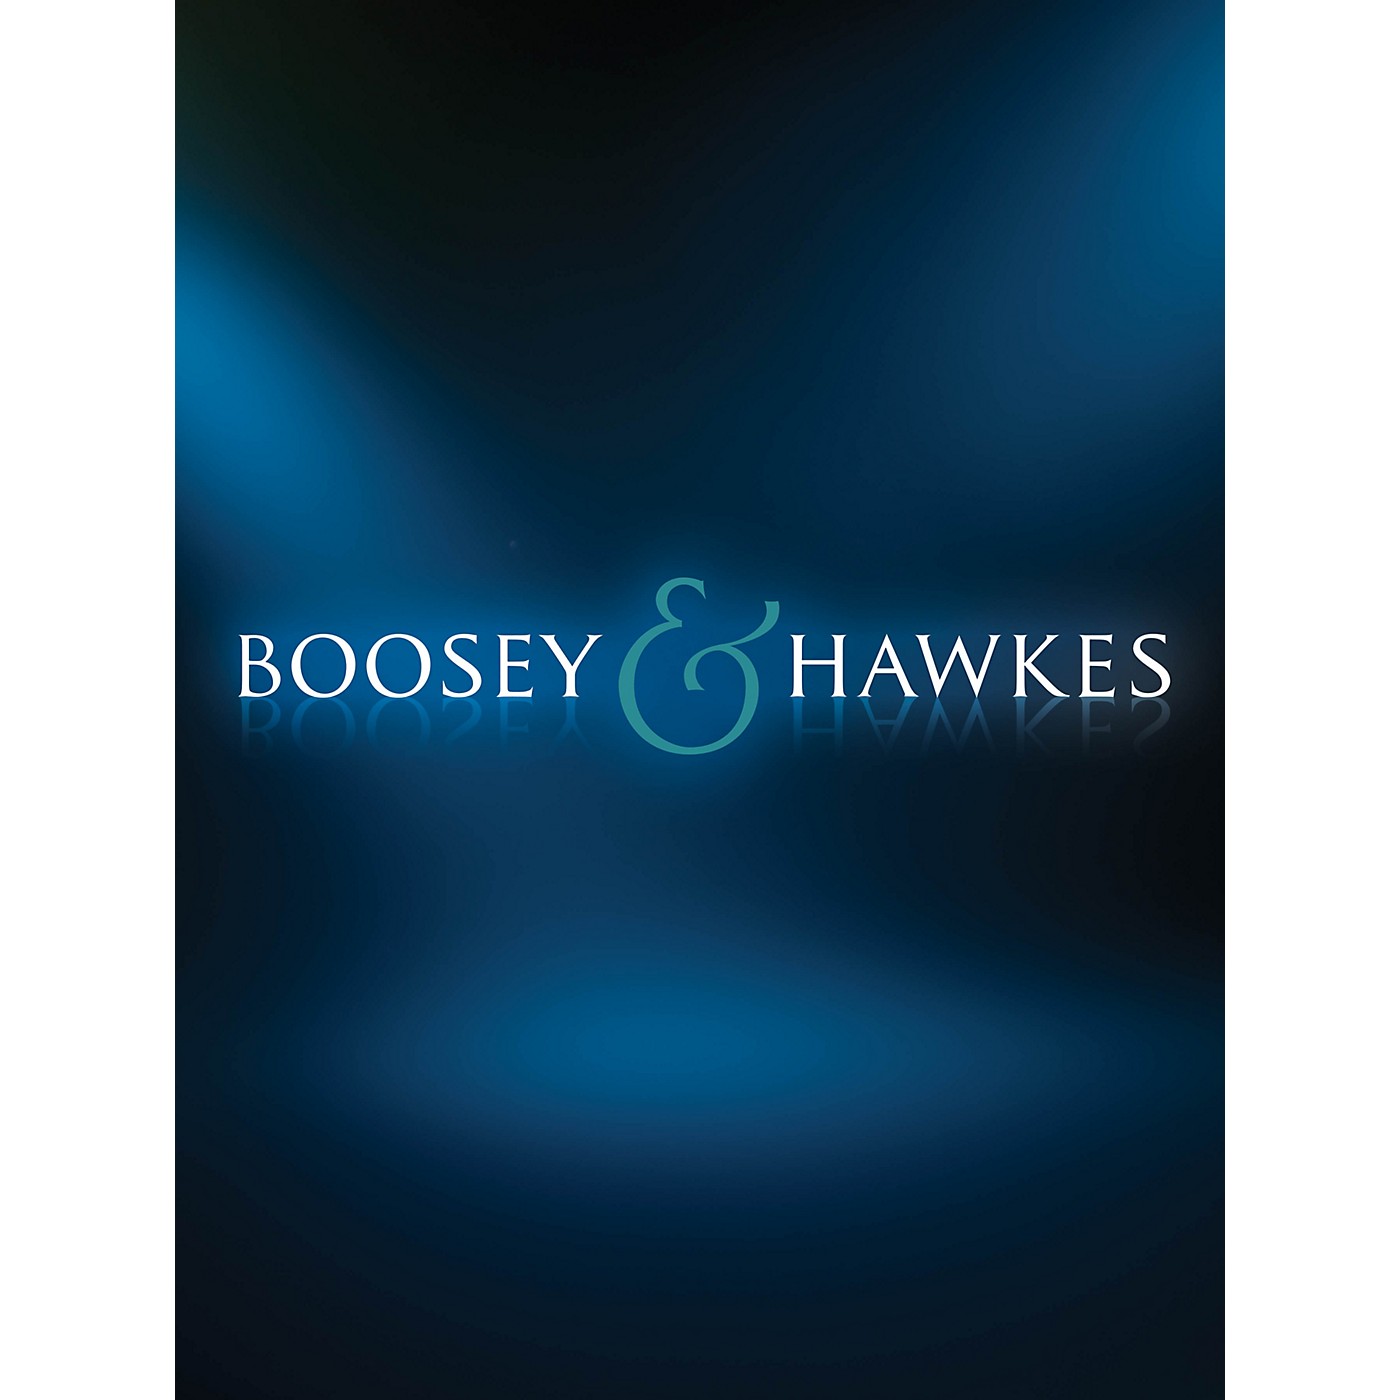 Boosey and Hawkes Cordoba, Op. 232, No. 4 Boosey & Hawkes Chamber Music Composed by Isaac Albeniz Edited by John Williams thumbnail